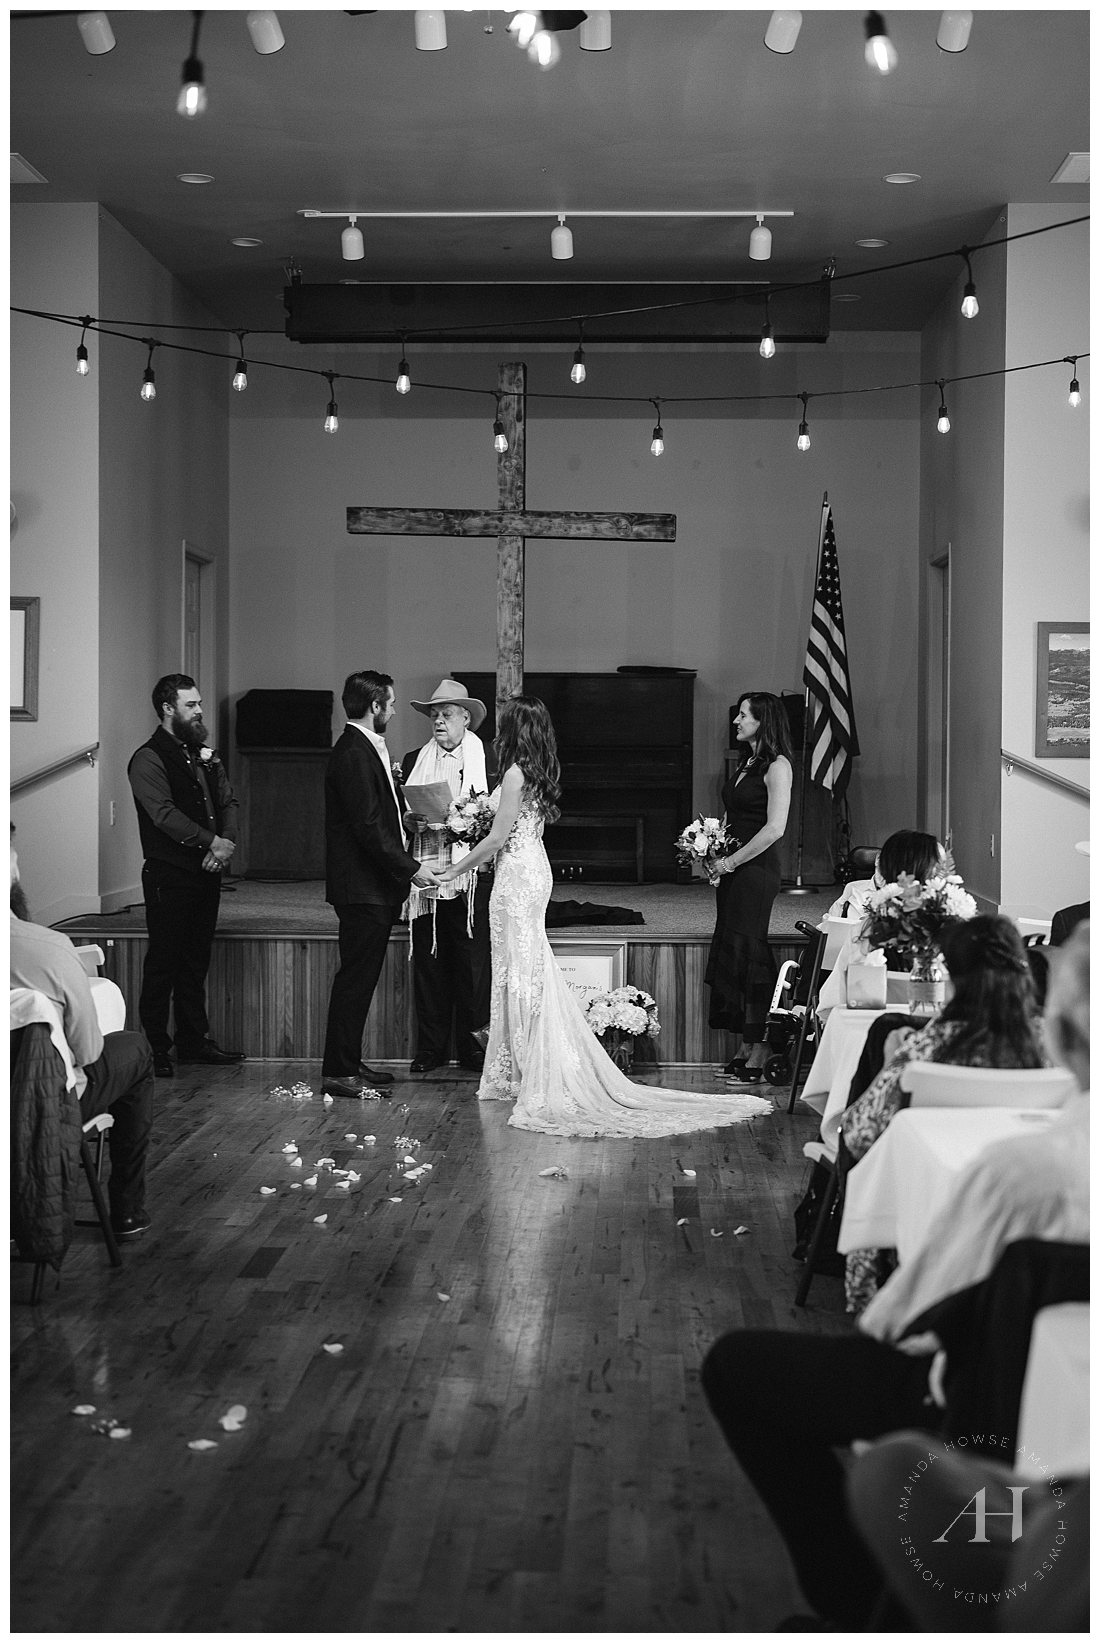 B&W Wedding Portraits at Indoor Ceremony | Photographed by the Best Tacoma Wedding Photographer Amanda Howse Photography